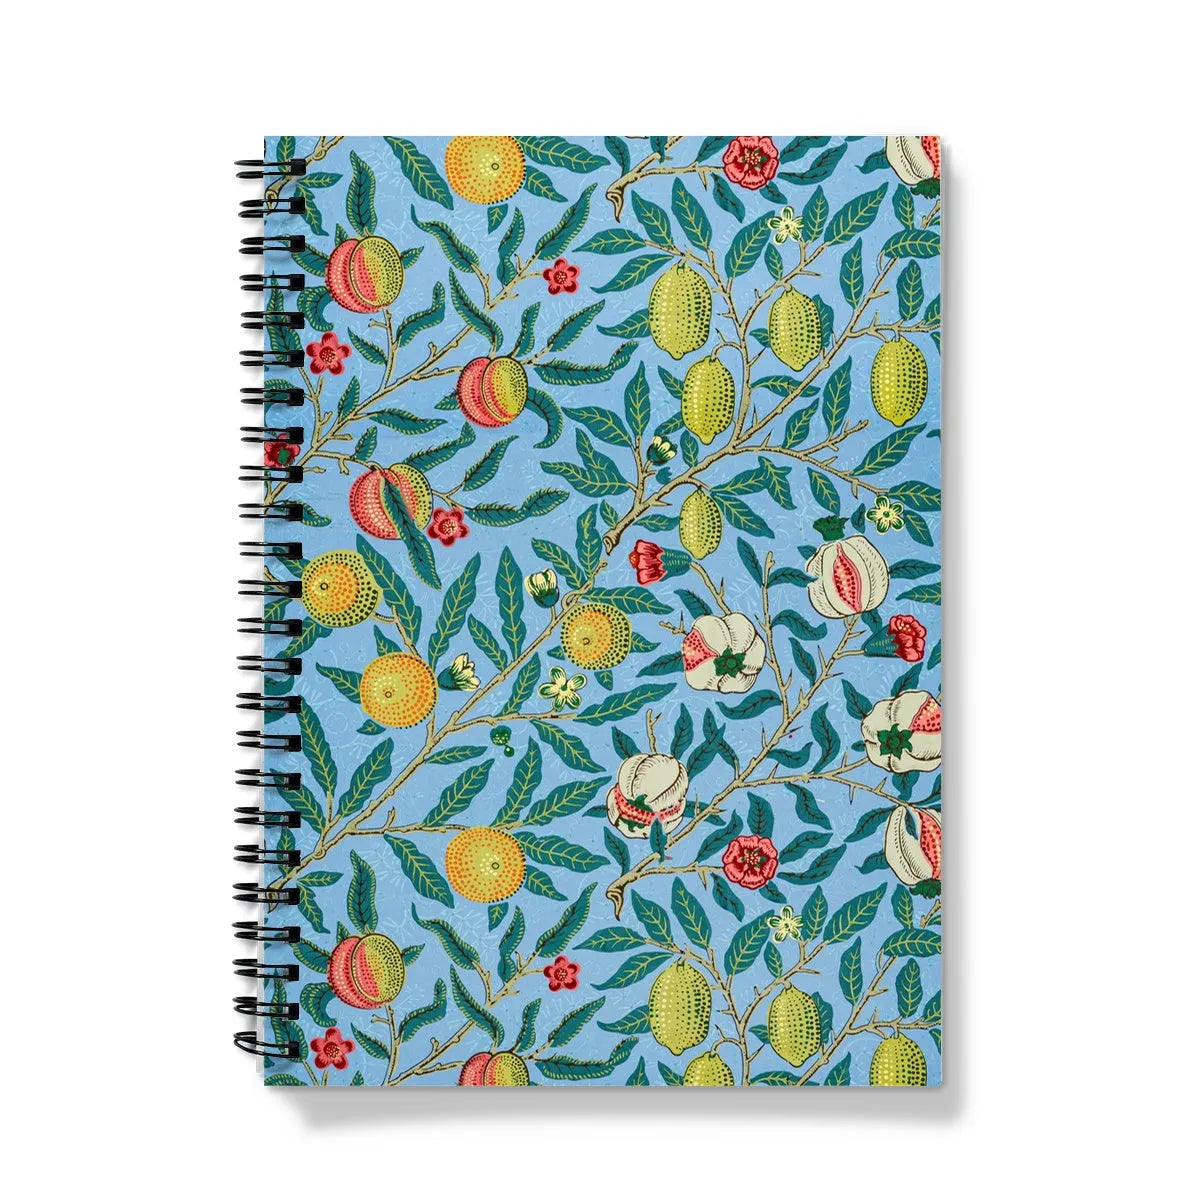 Four Fruits - William Morris Notebook - A5 - Graph Paper - Notebooks & Notepads - Aesthetic Art